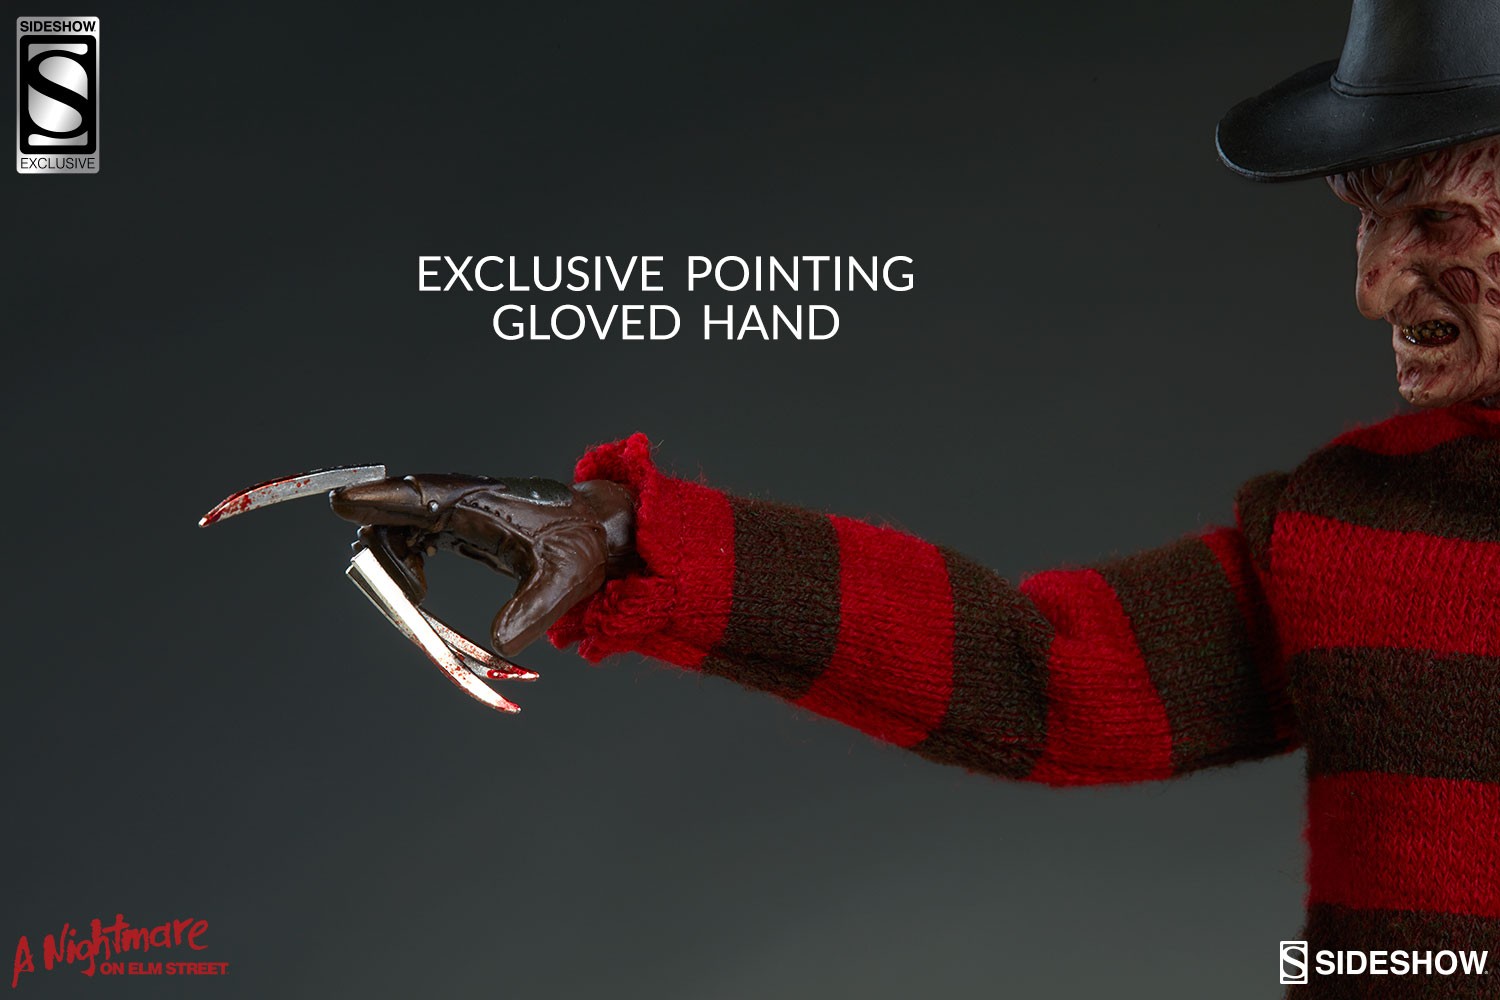 Freddy Krueger Exclusive Edition View 1